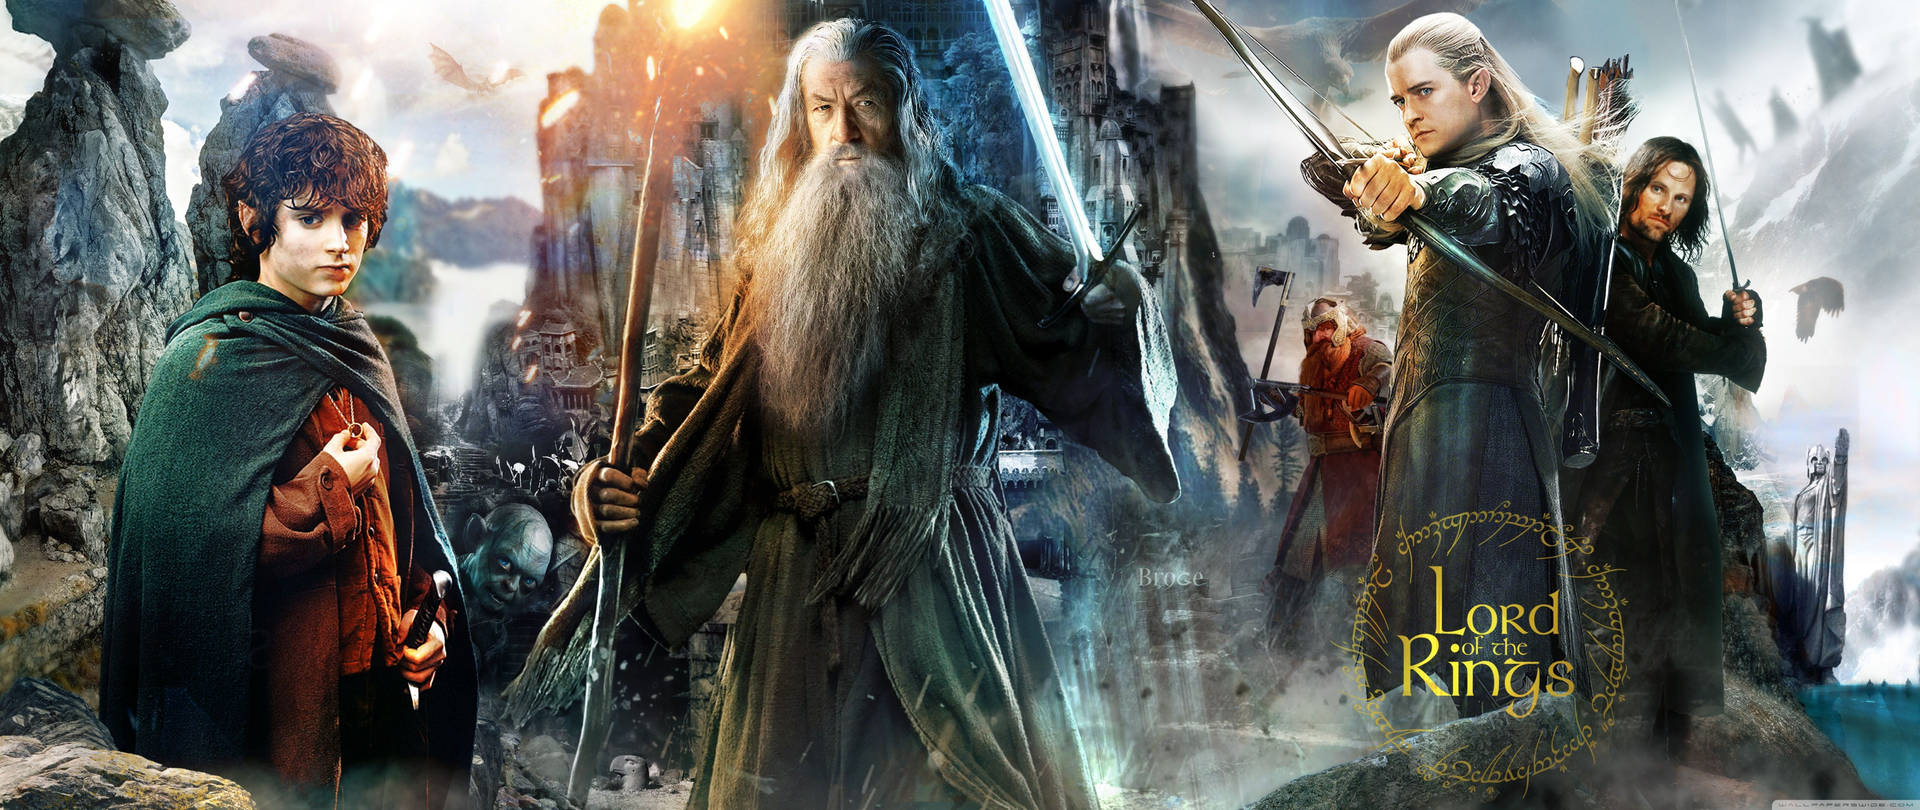 Lord Of The Rings Wallpaper Images